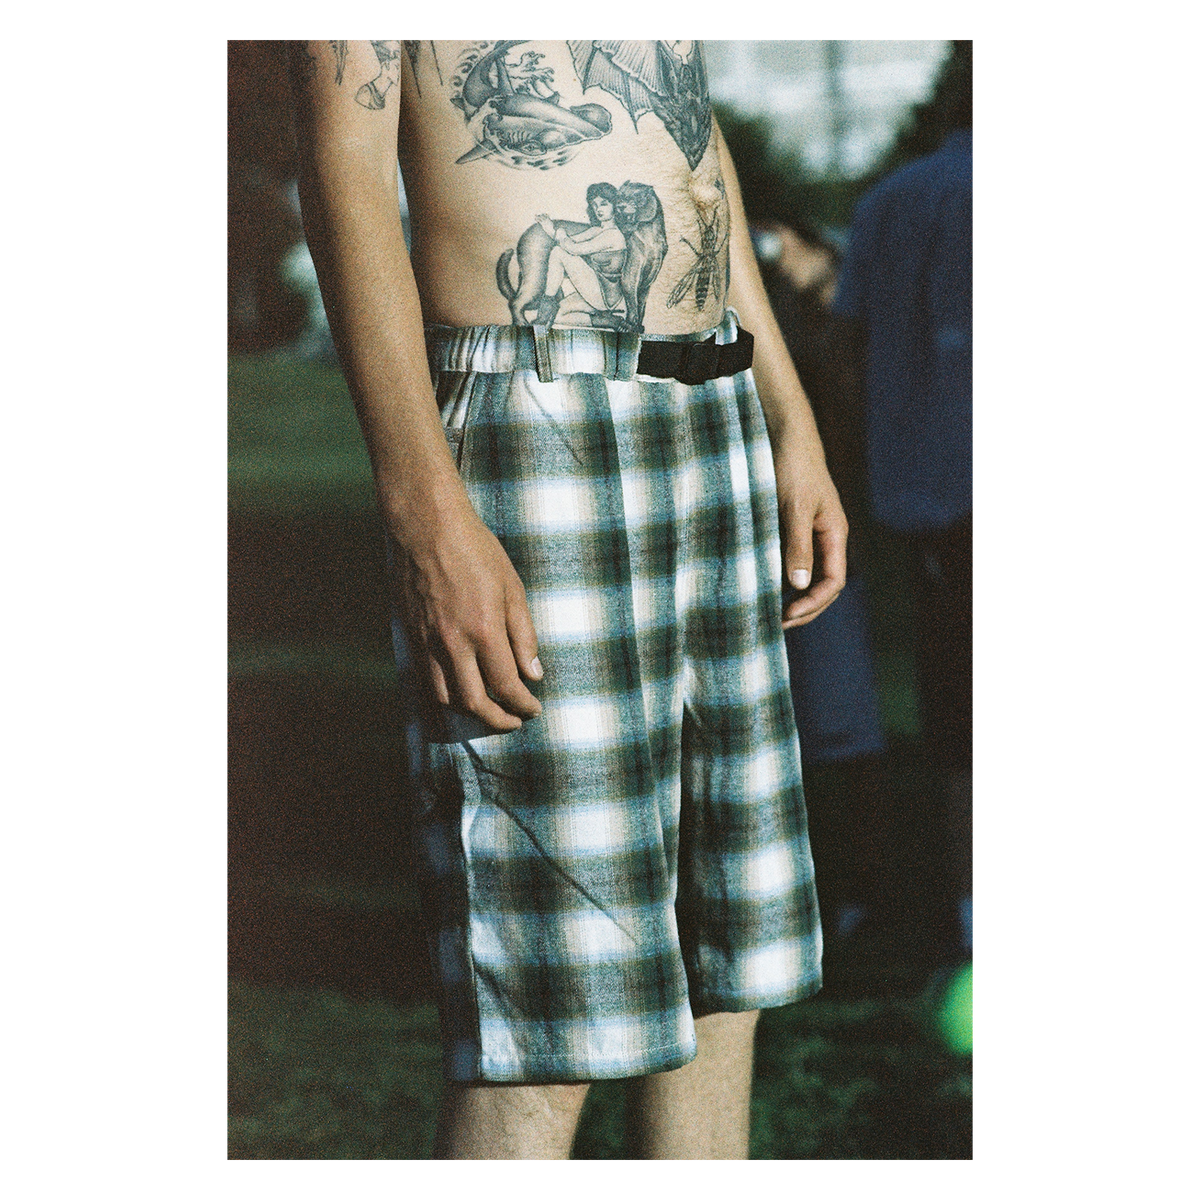 Peace Circle Belted Short - Green Plaid